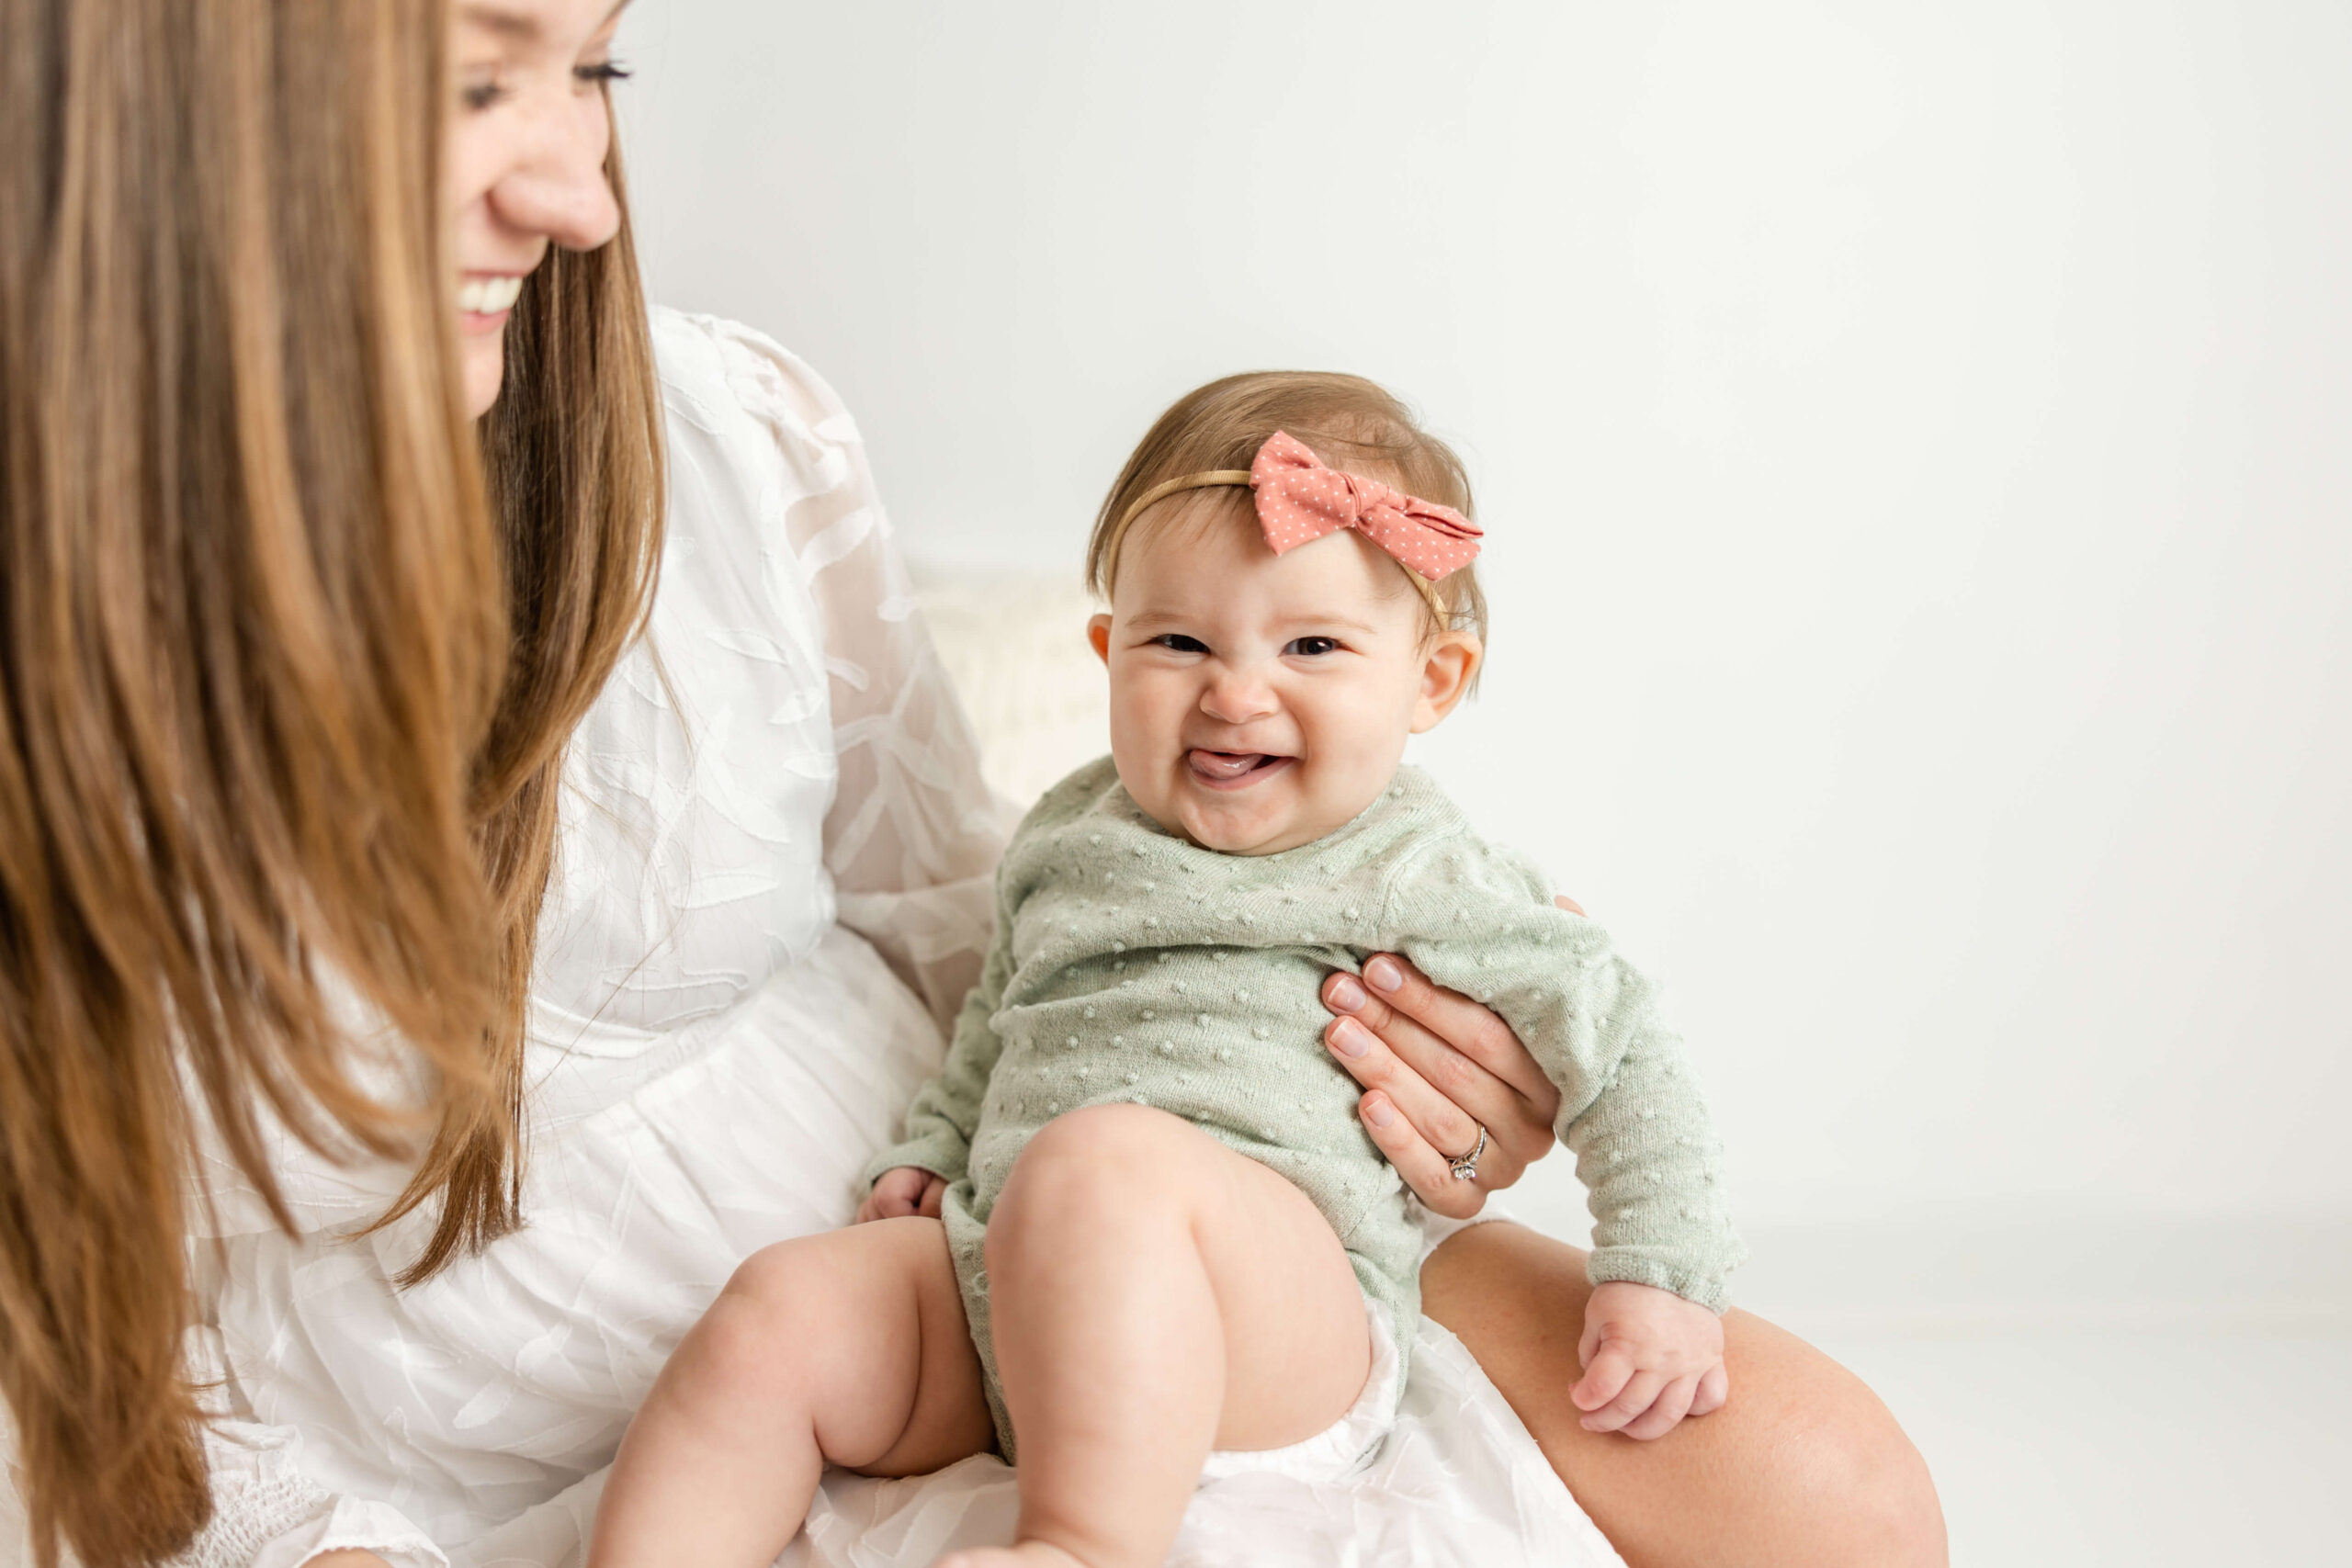 Smiling faces were captured during this motherhood session with Molly Berry Photography.